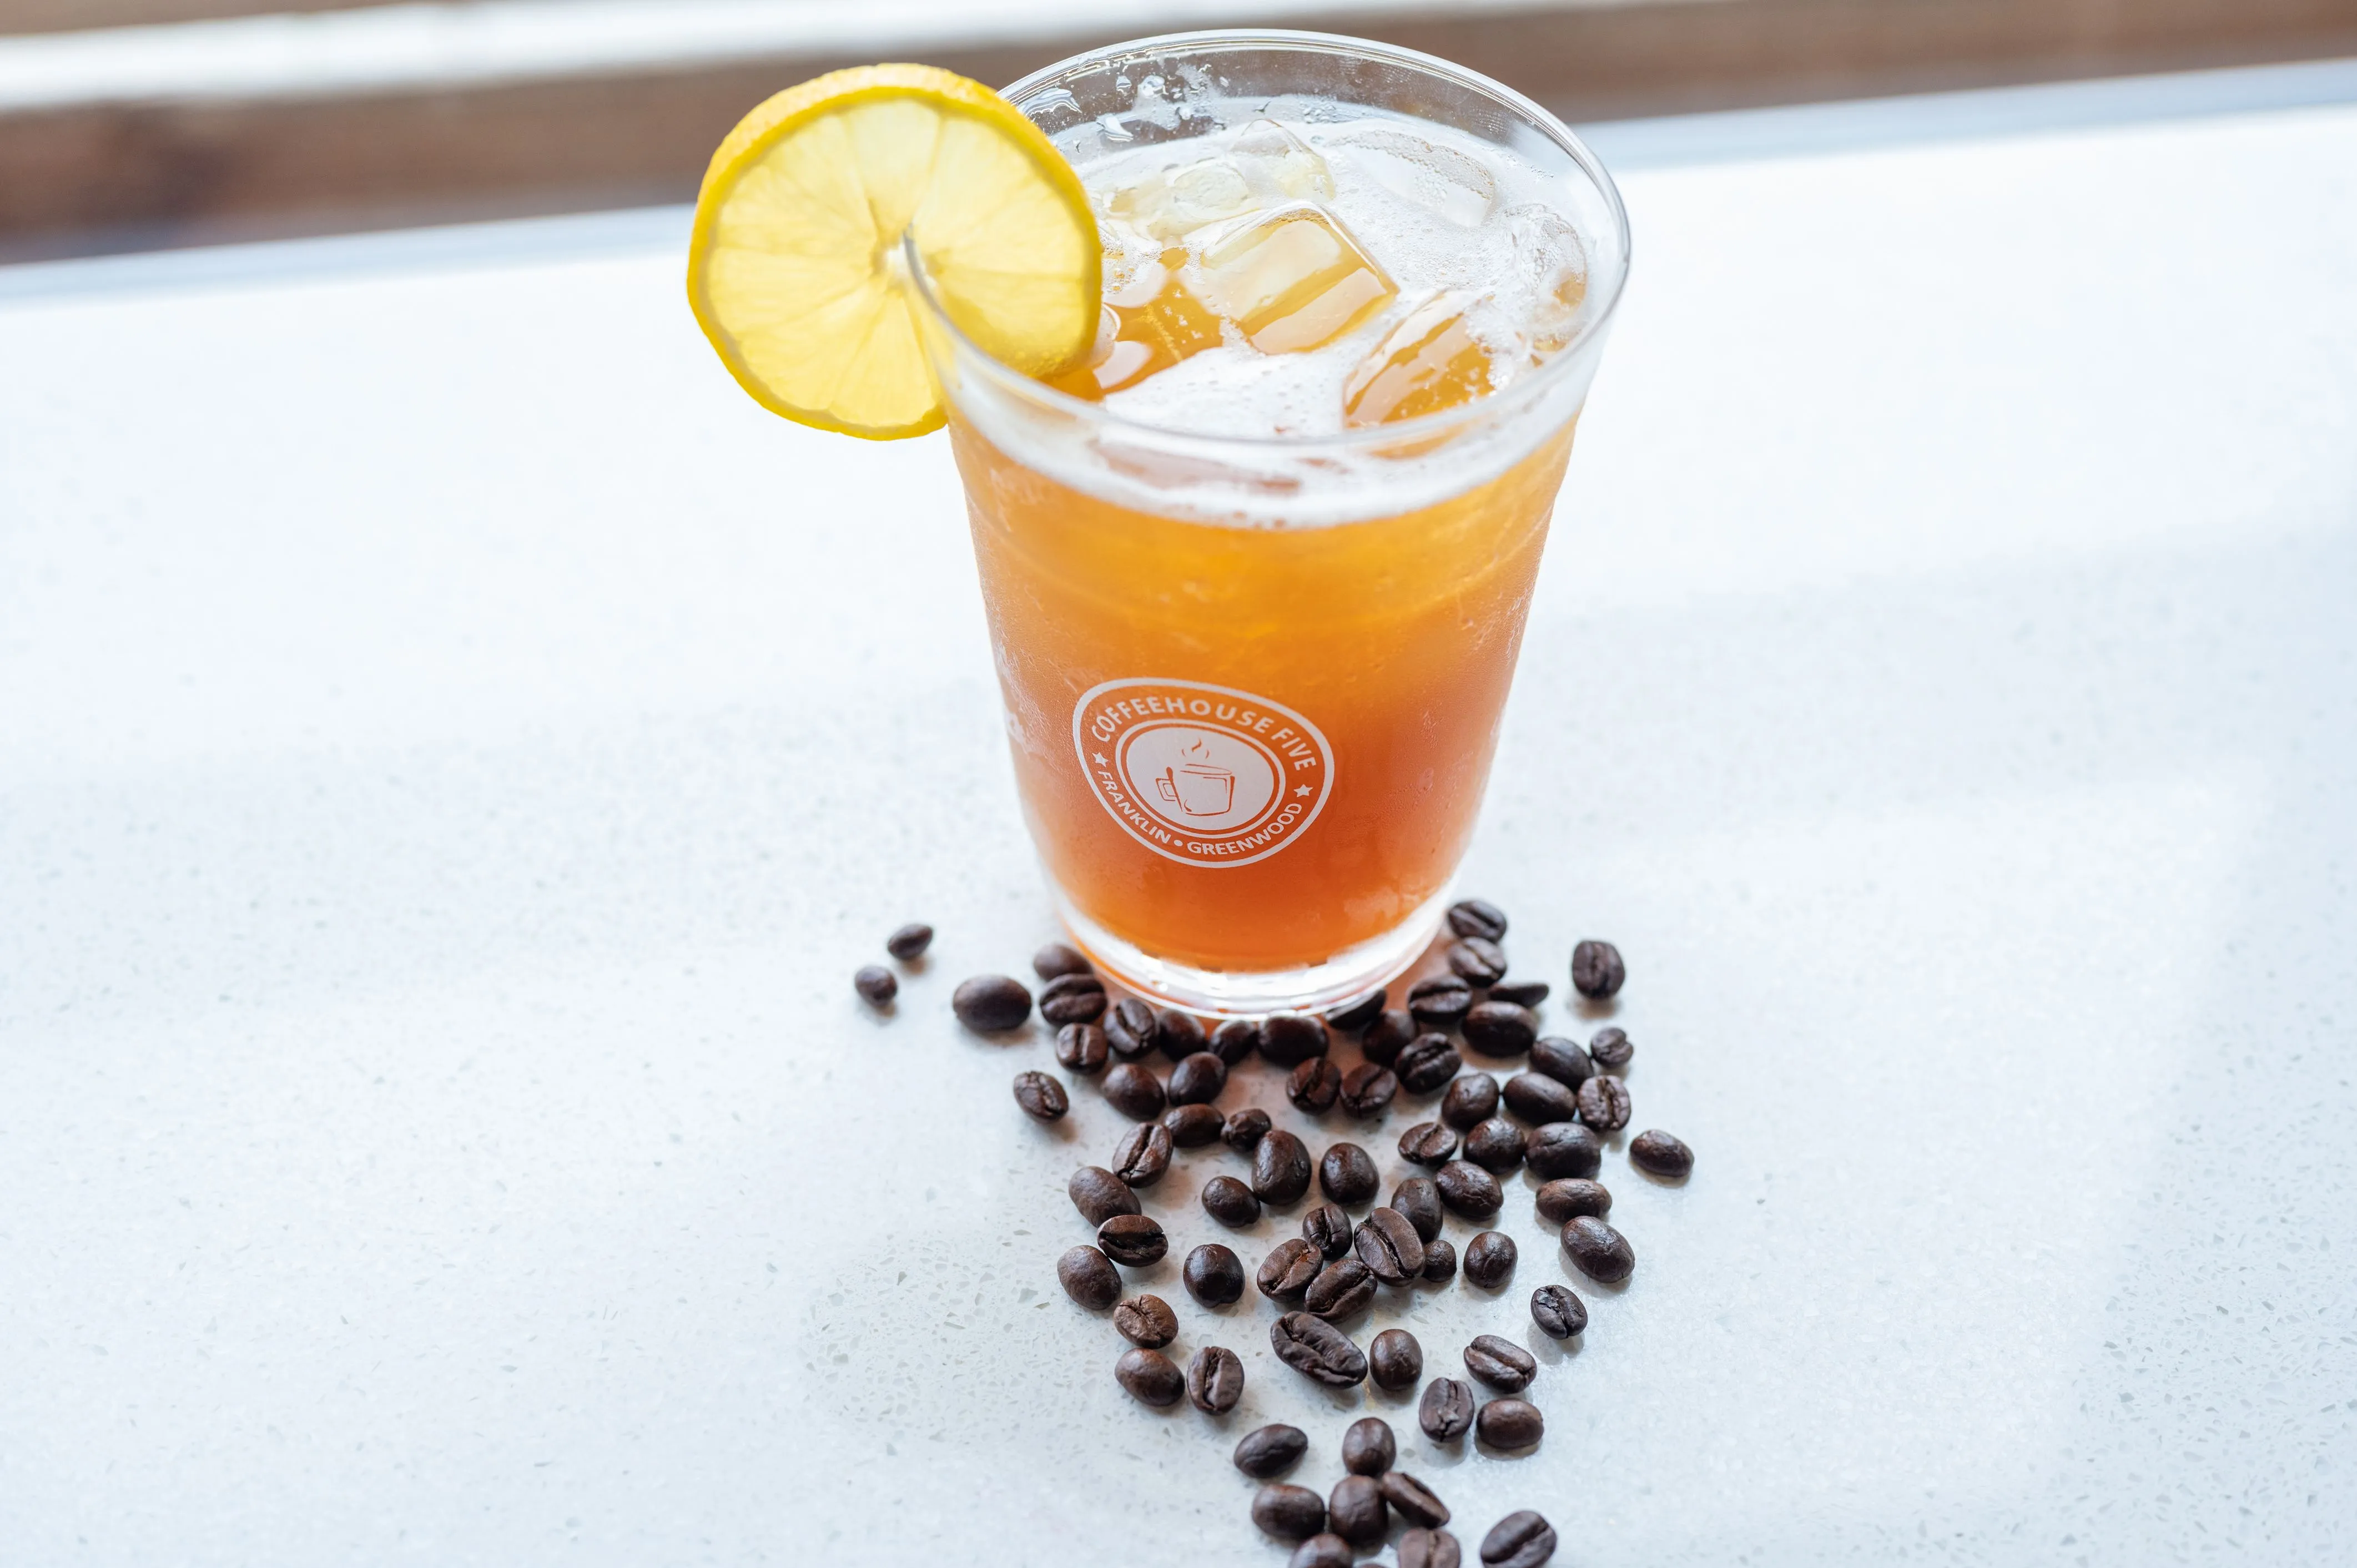 Iced coffee beverage garnished with a lemon slice, surrounded by scattered coffee beans on a light surface.